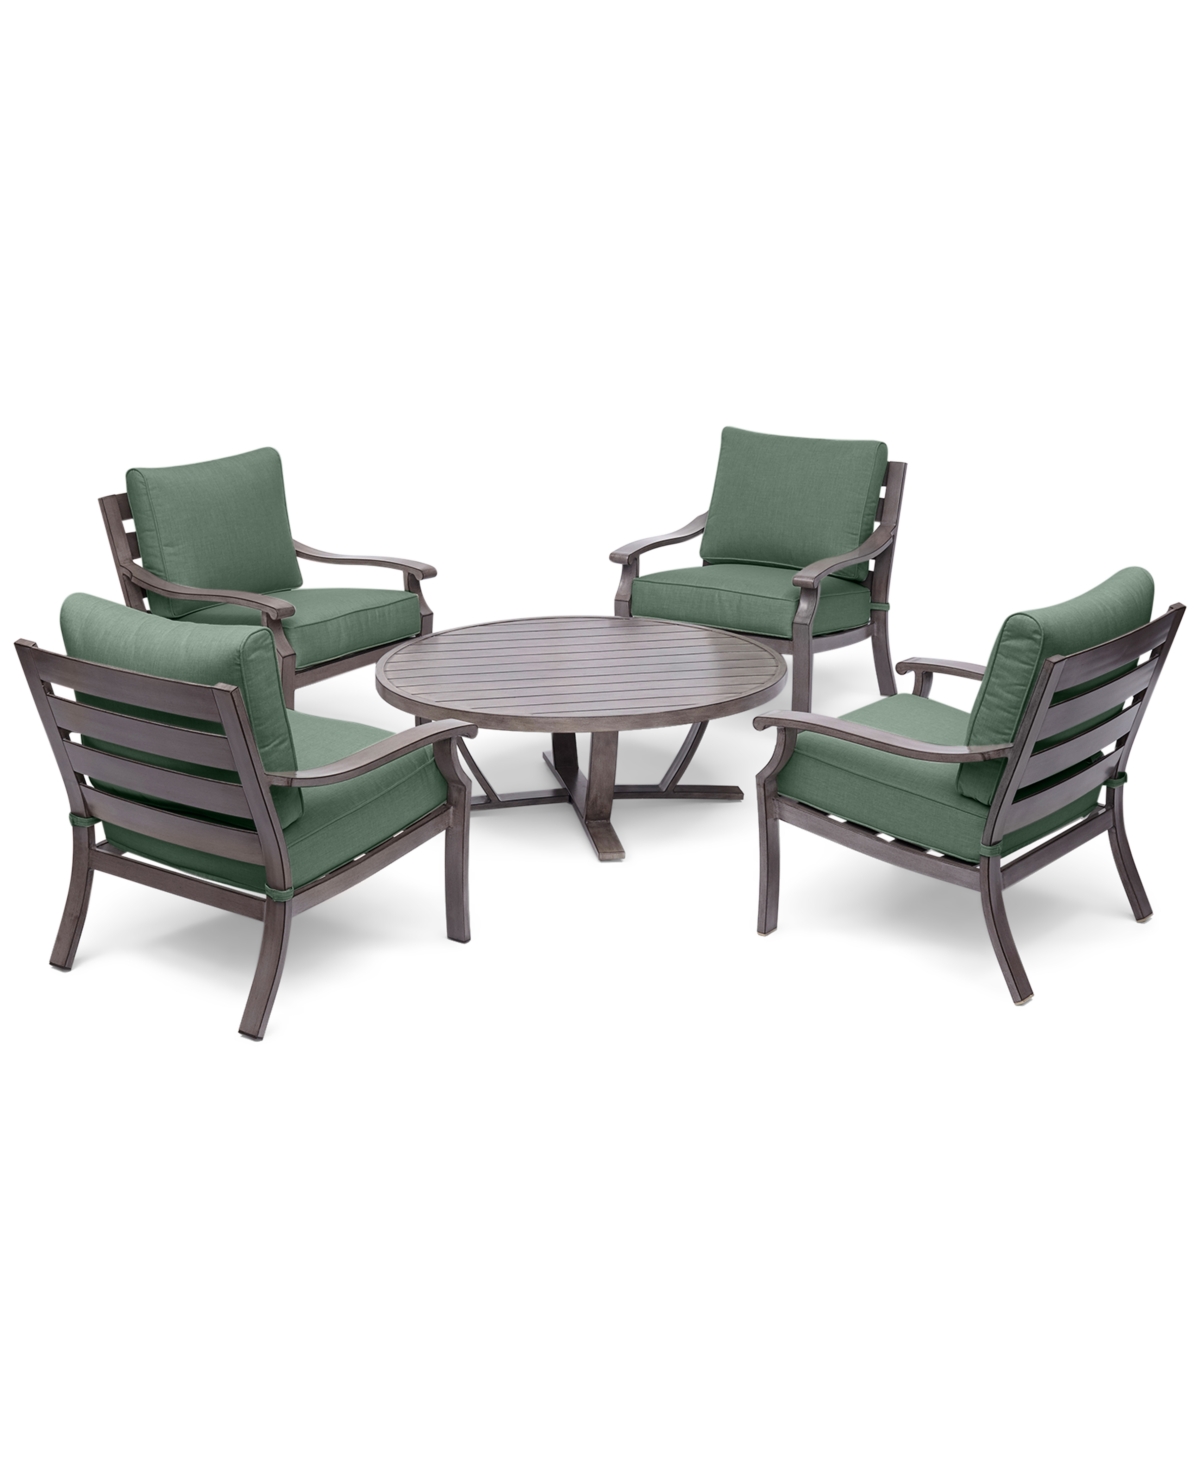 Agio Tara Aluminum Outdoor 5-pc. Seating Set (48" Round Table & 4 Rocker Chairs), Created For Macy's In Outdura Grasshopper